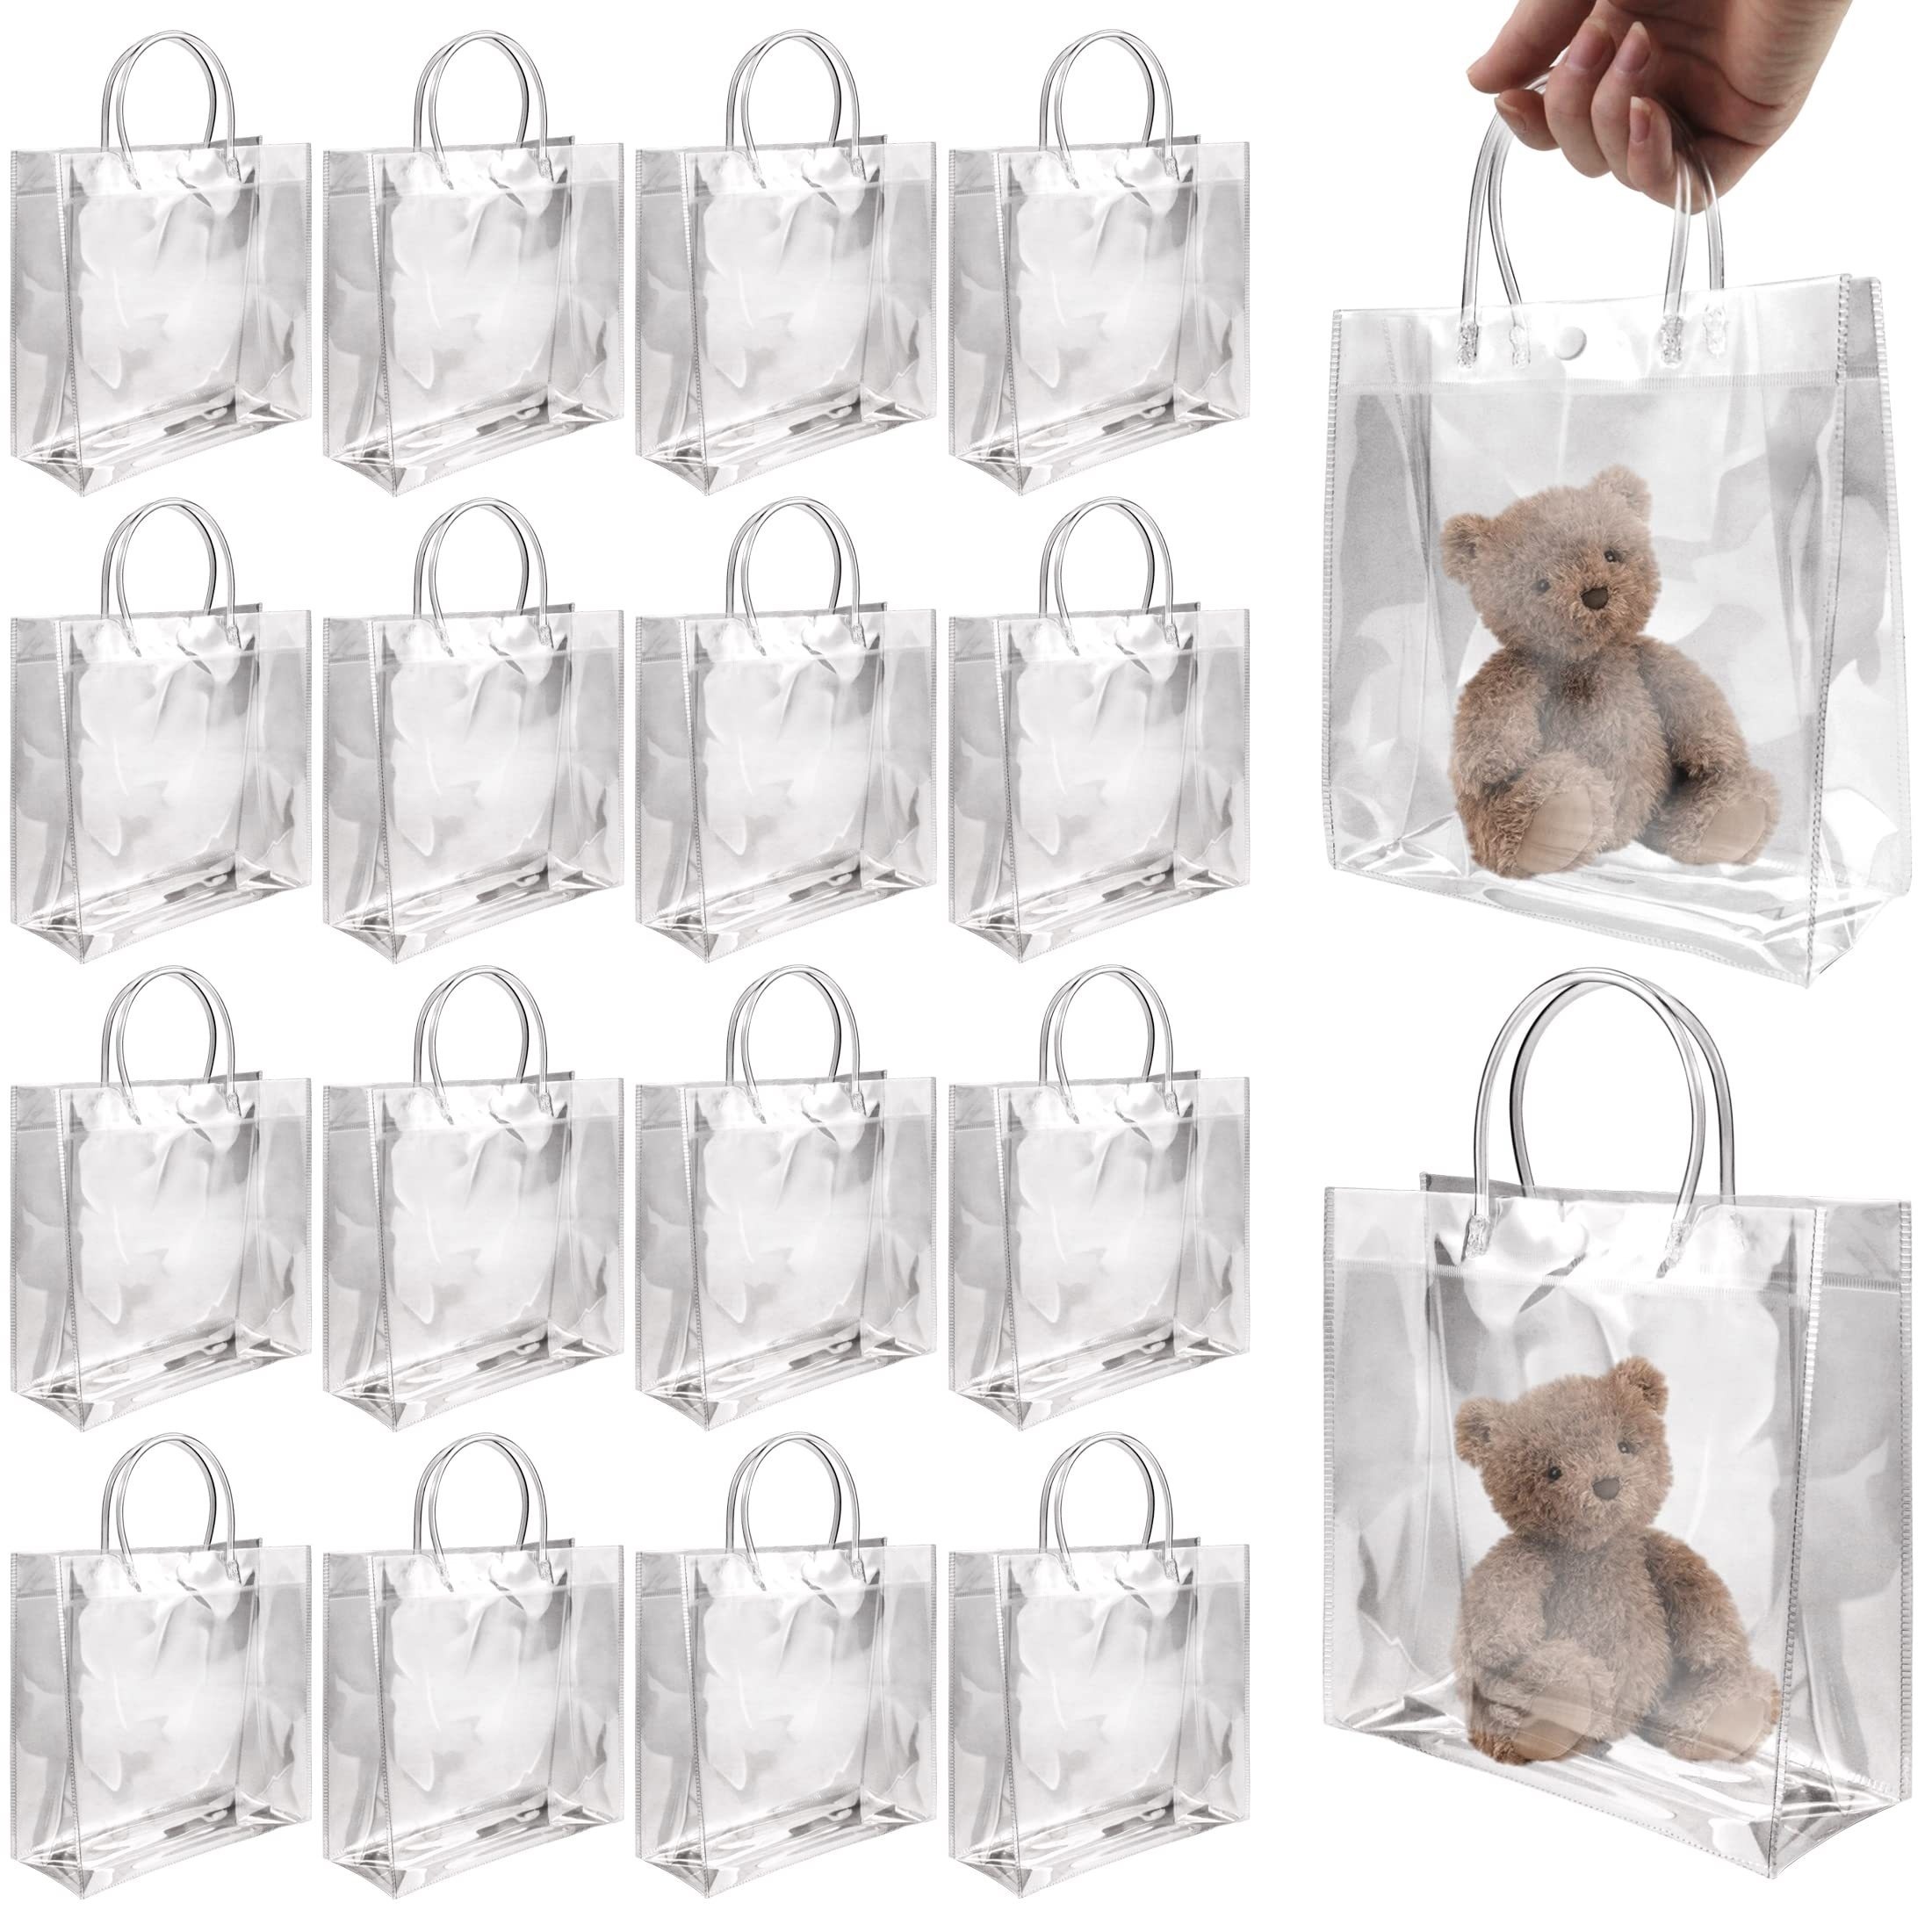 32 Pcs Clear PVC Gift Bags with Handle,Reusable Plastic Gift Wrap Bag Transparent Tote Bag for Shopping Retail Merchandise Boutique Wedding Birthday